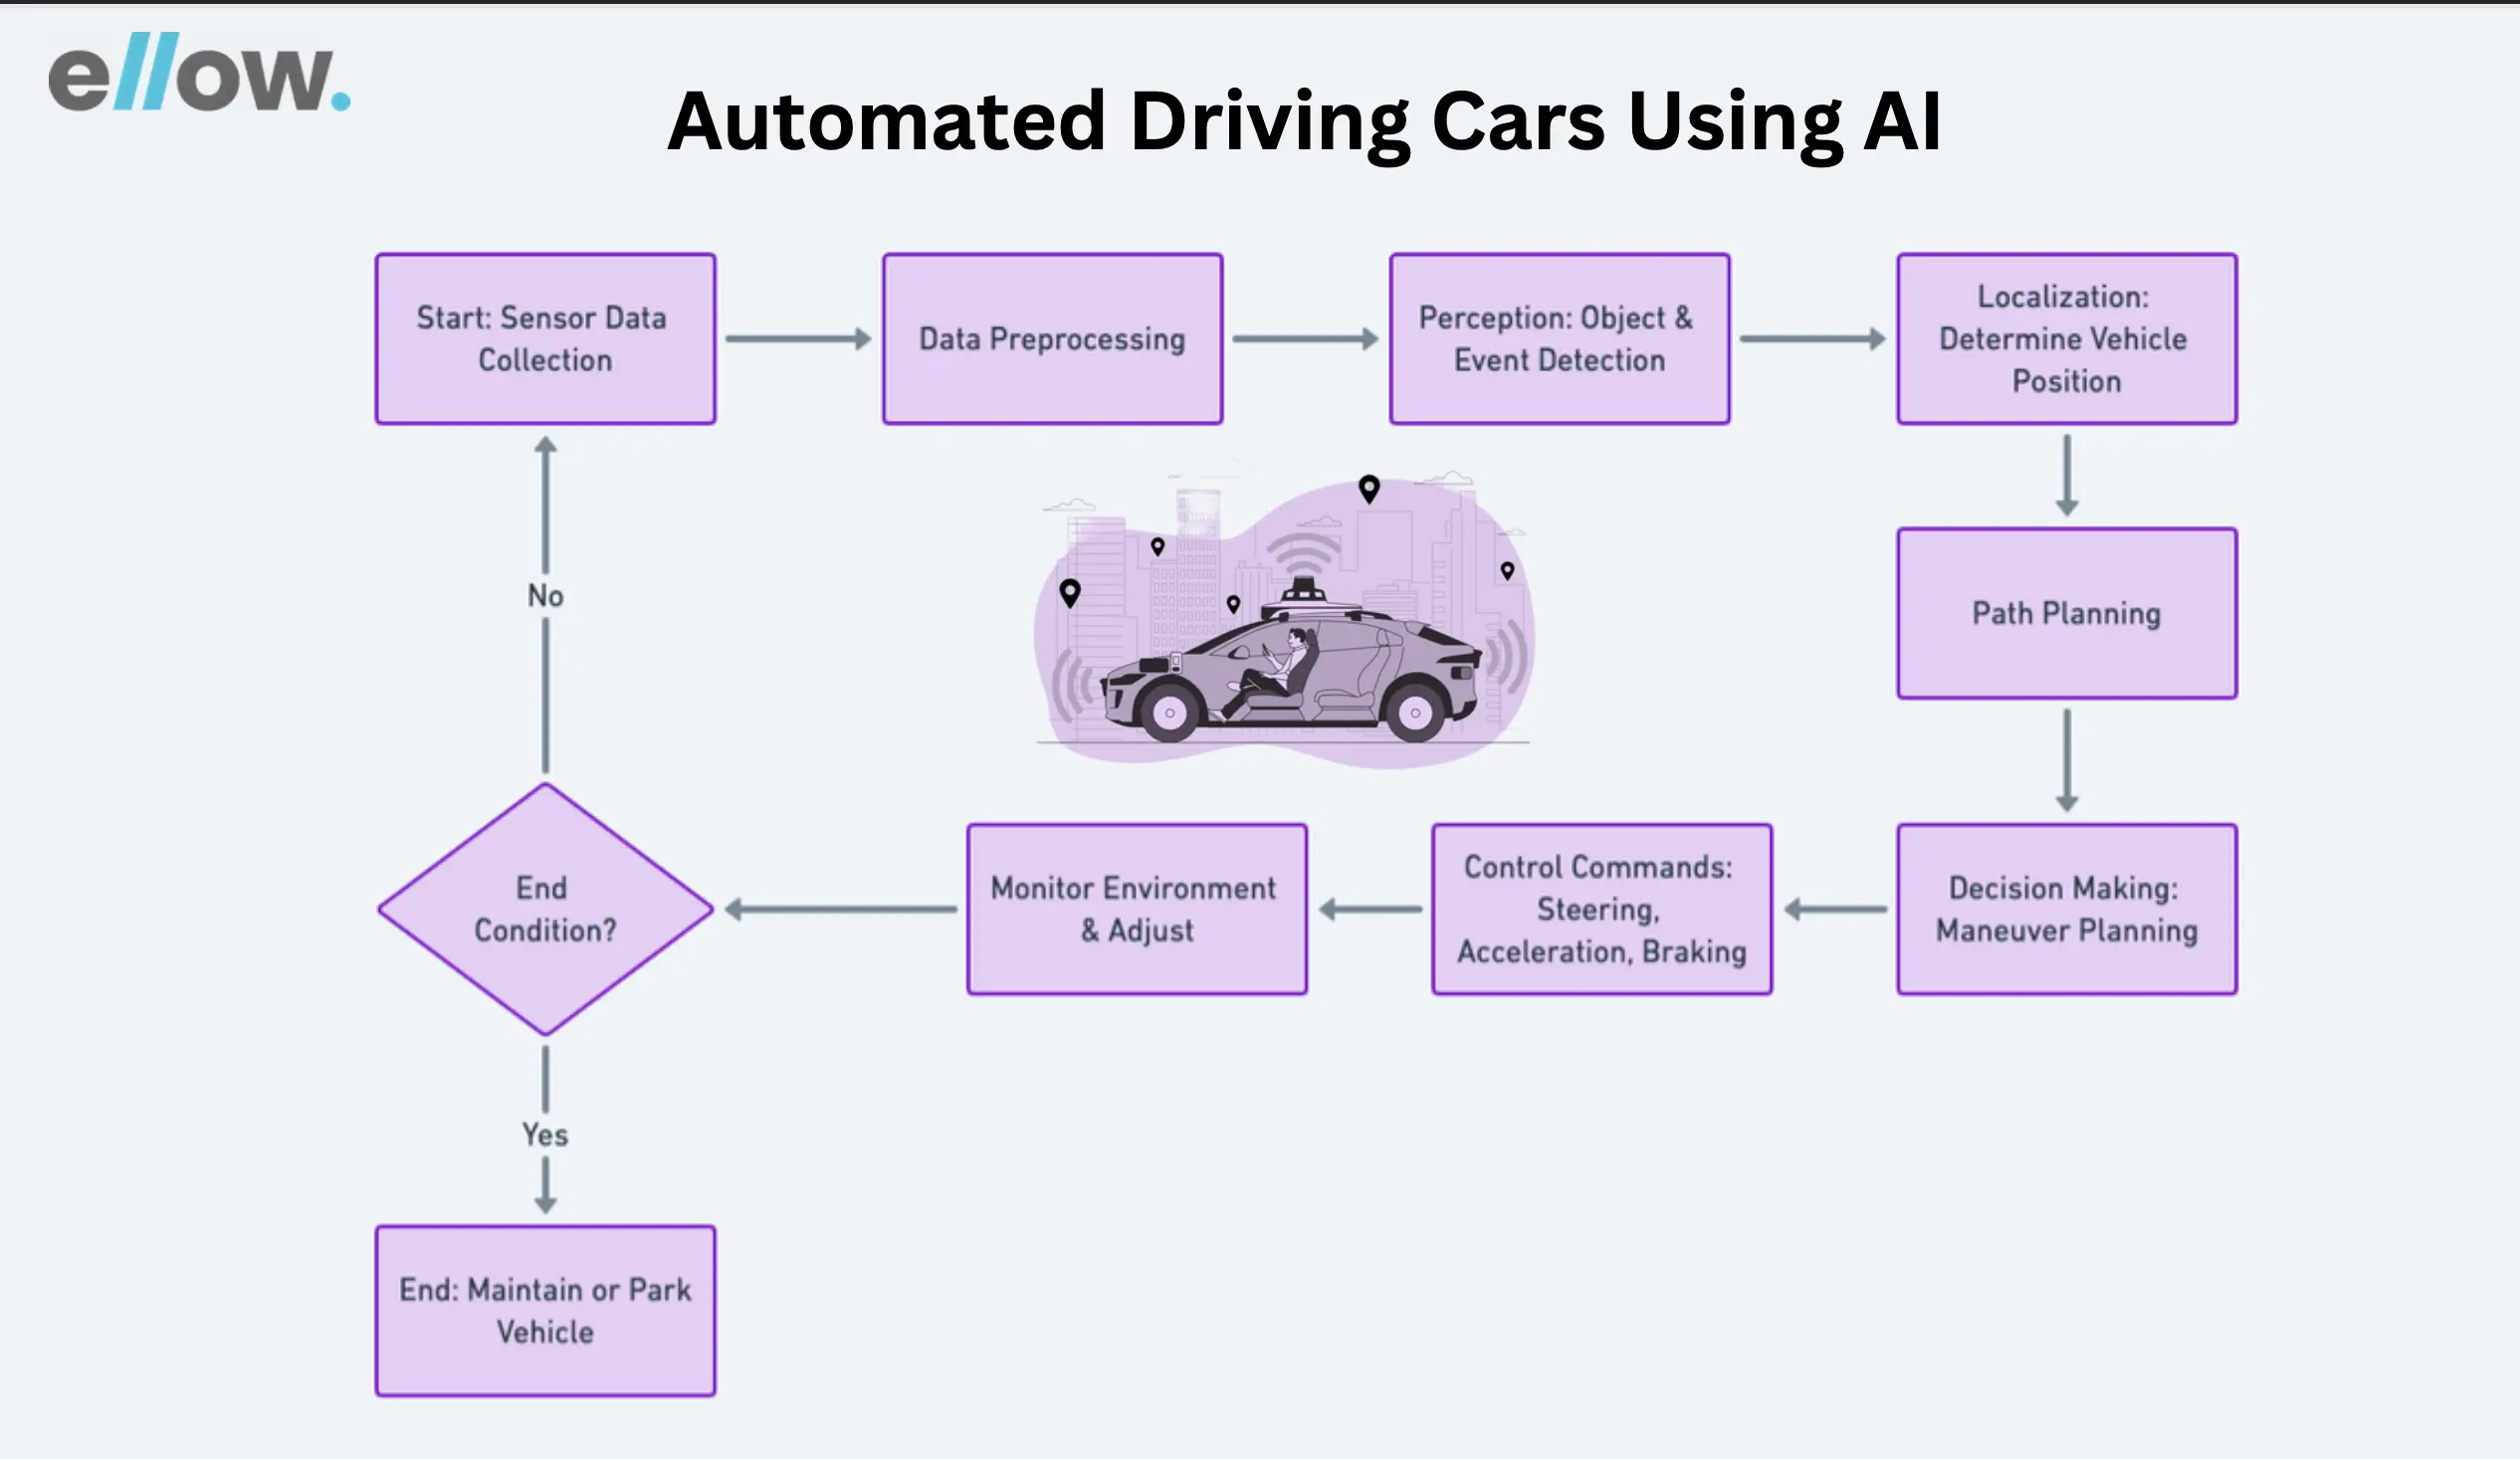 Automated Driving Cars Using AI